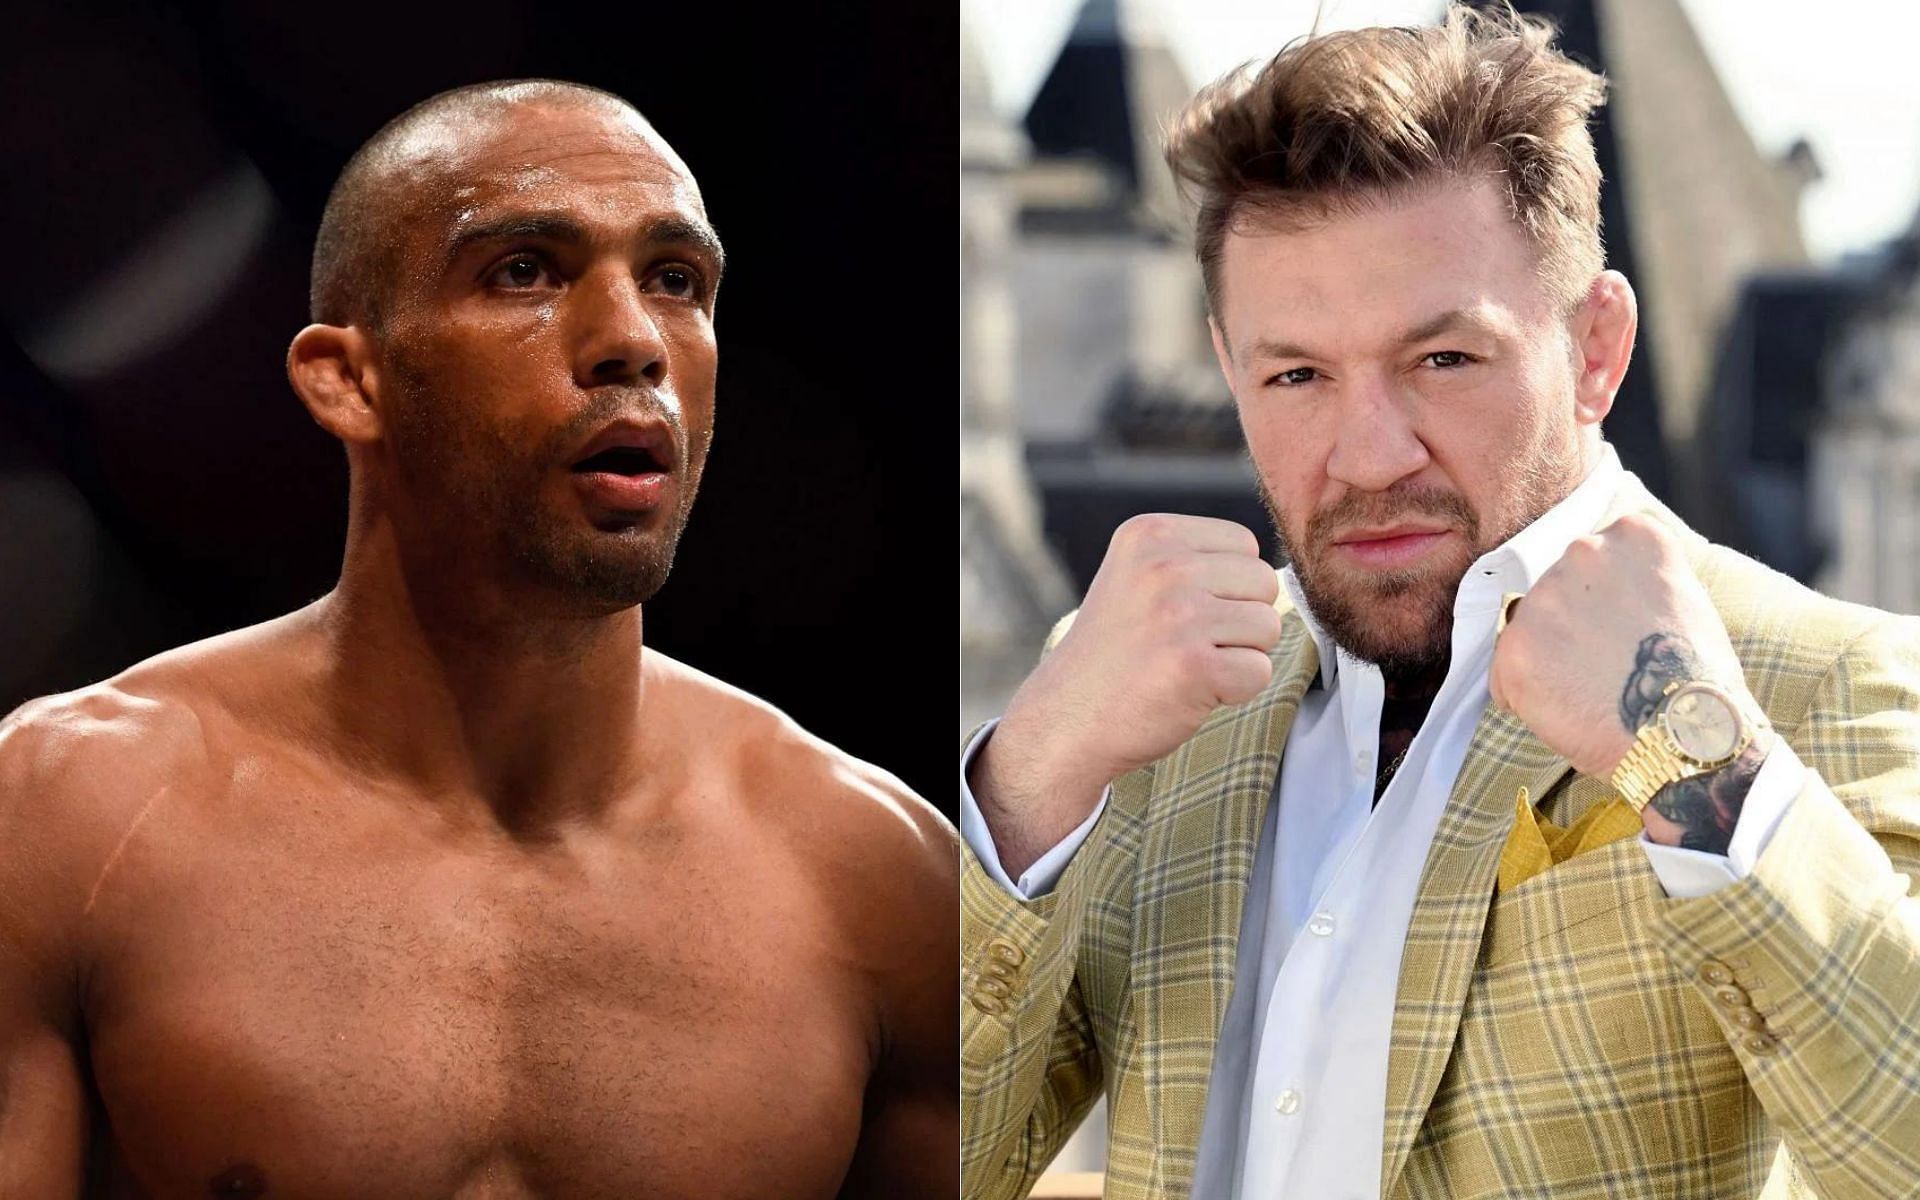 Edson Barboza (left) once demanded for Conor McGregor to be stripped of the title (right) [Images via Getty]